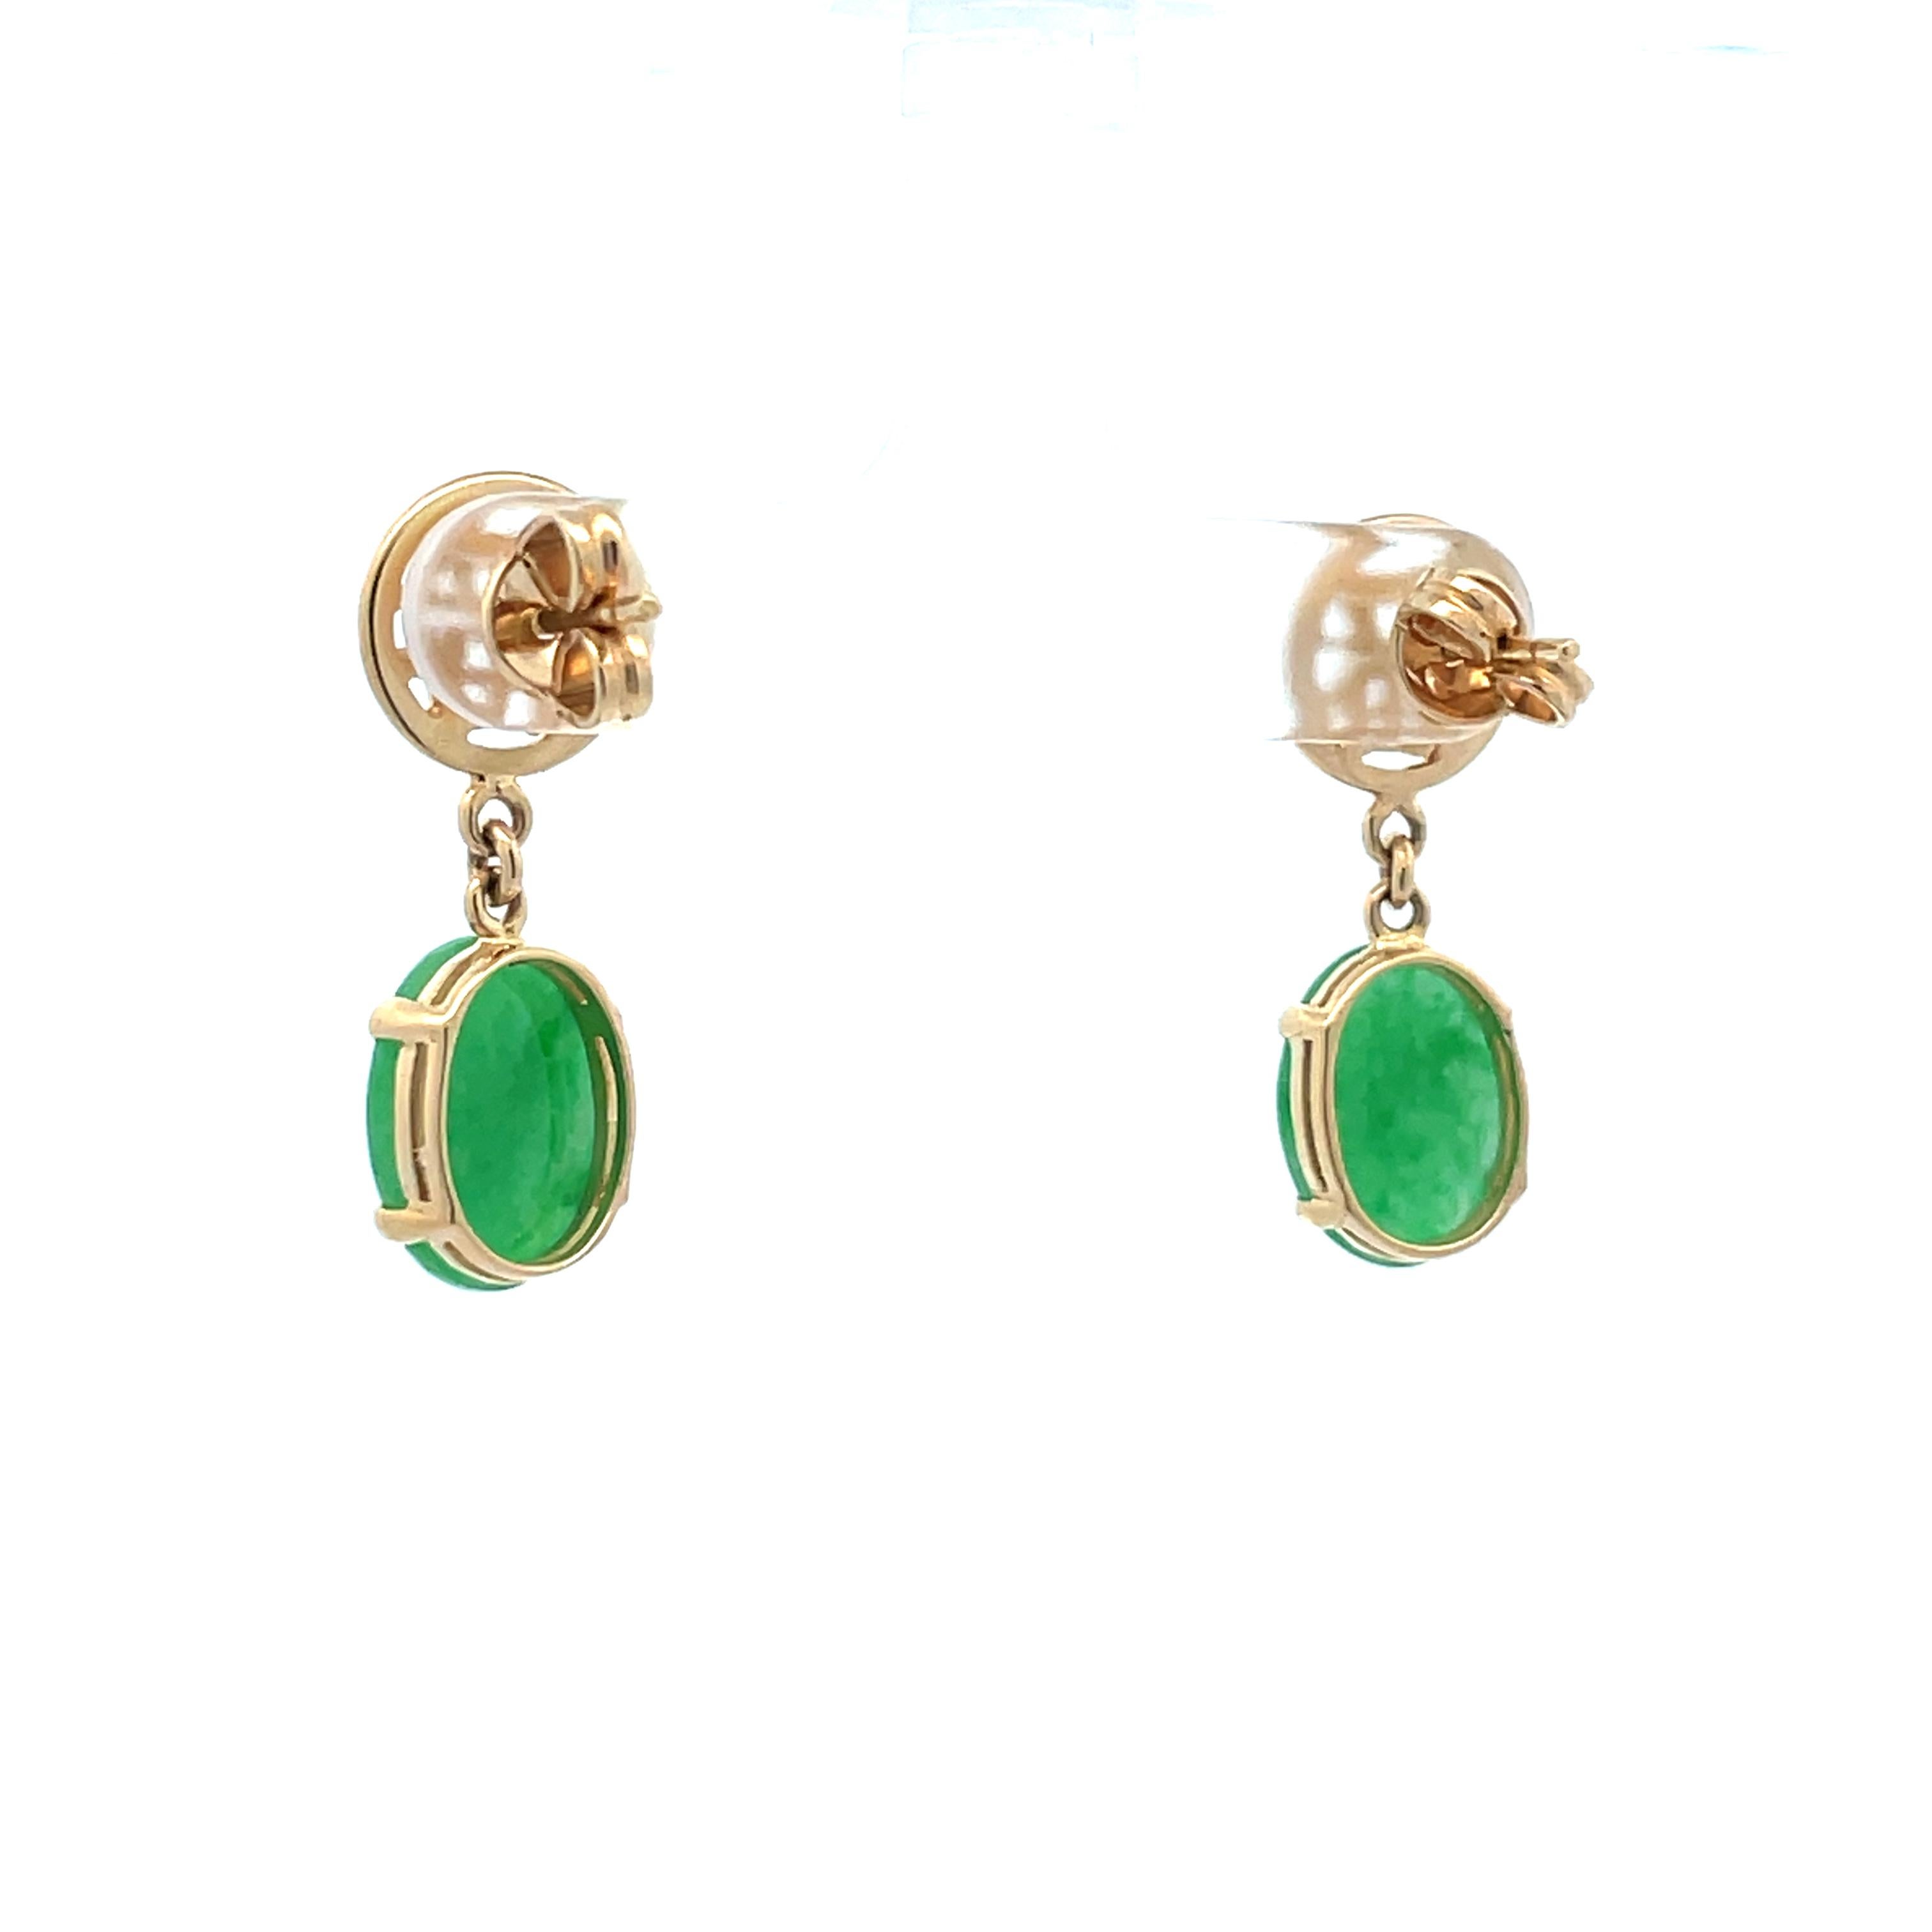 1960s 18K Yellow Gold Jade Earrings  In Excellent Condition For Sale In Lexington, KY